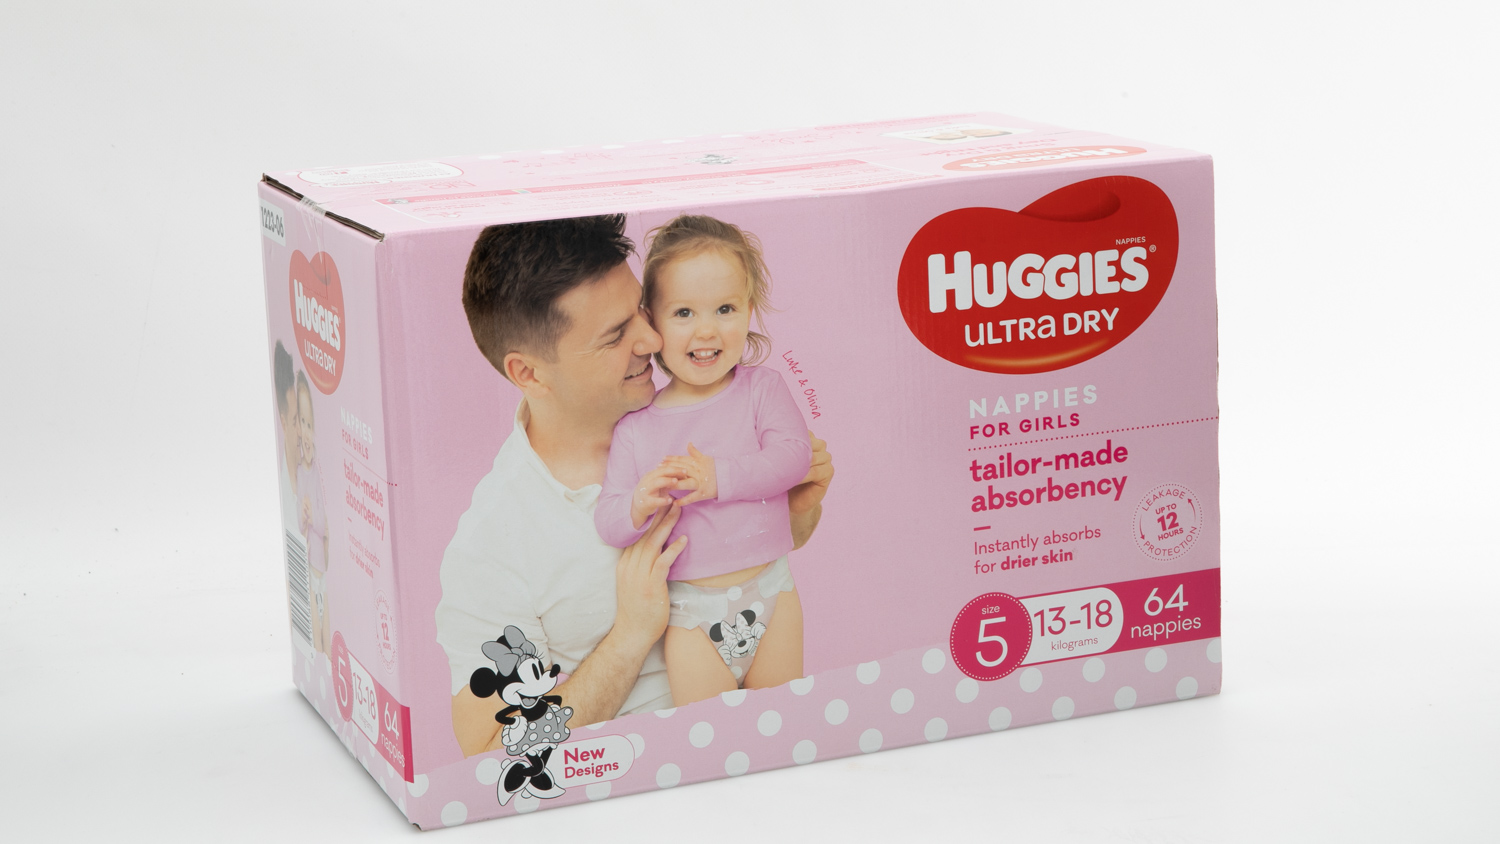 Huggies Ultra Dry Nappies for Girls Size 5 carousel image